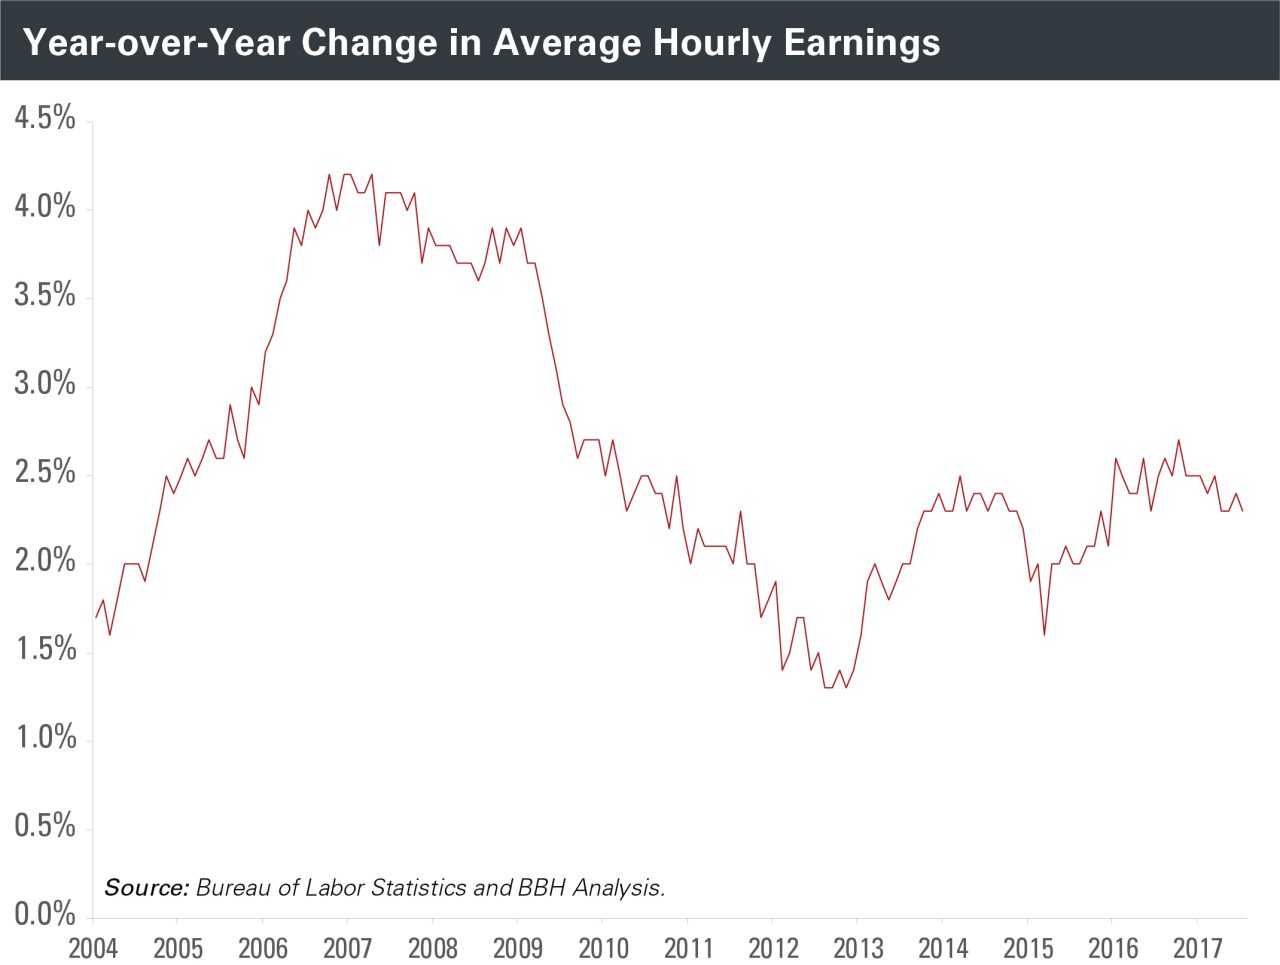 Year-over-Year Change in Avg. Hourly Earnings from 2004 to 2017